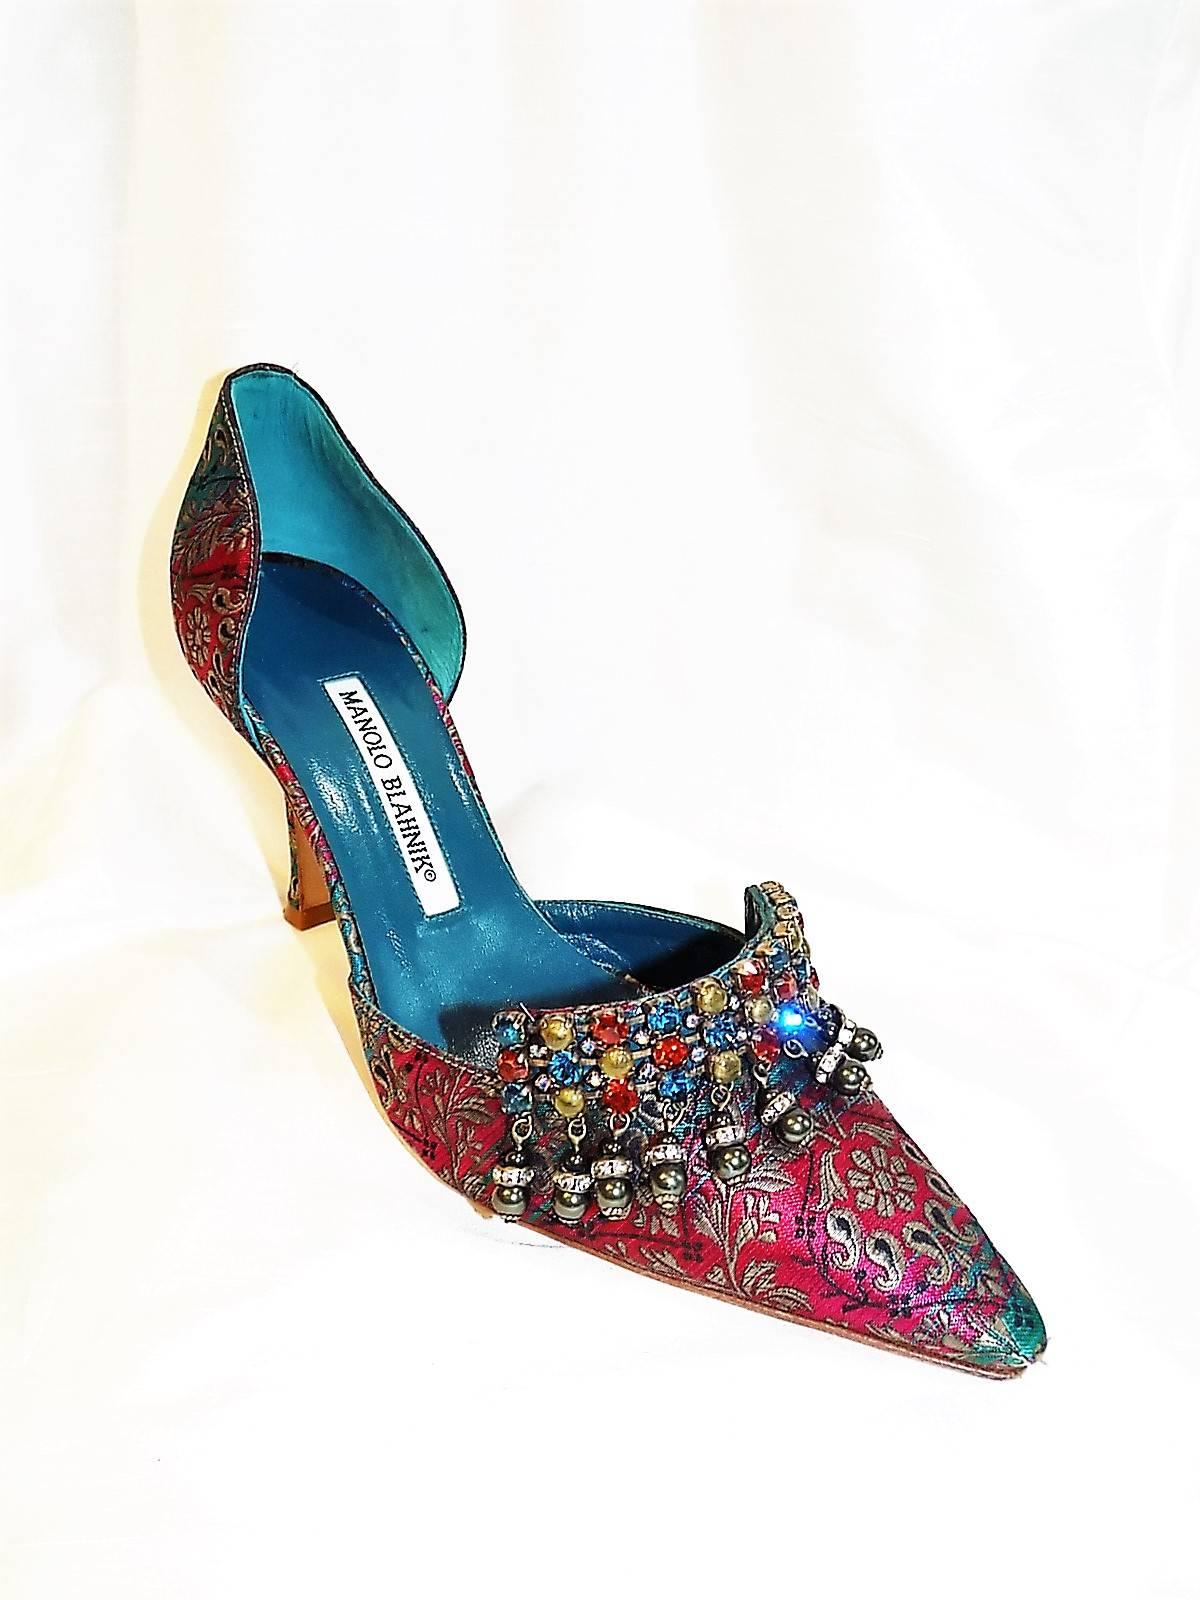 Women's Manolo Blahnik worn once brocade jeweled evening shoes size 37 